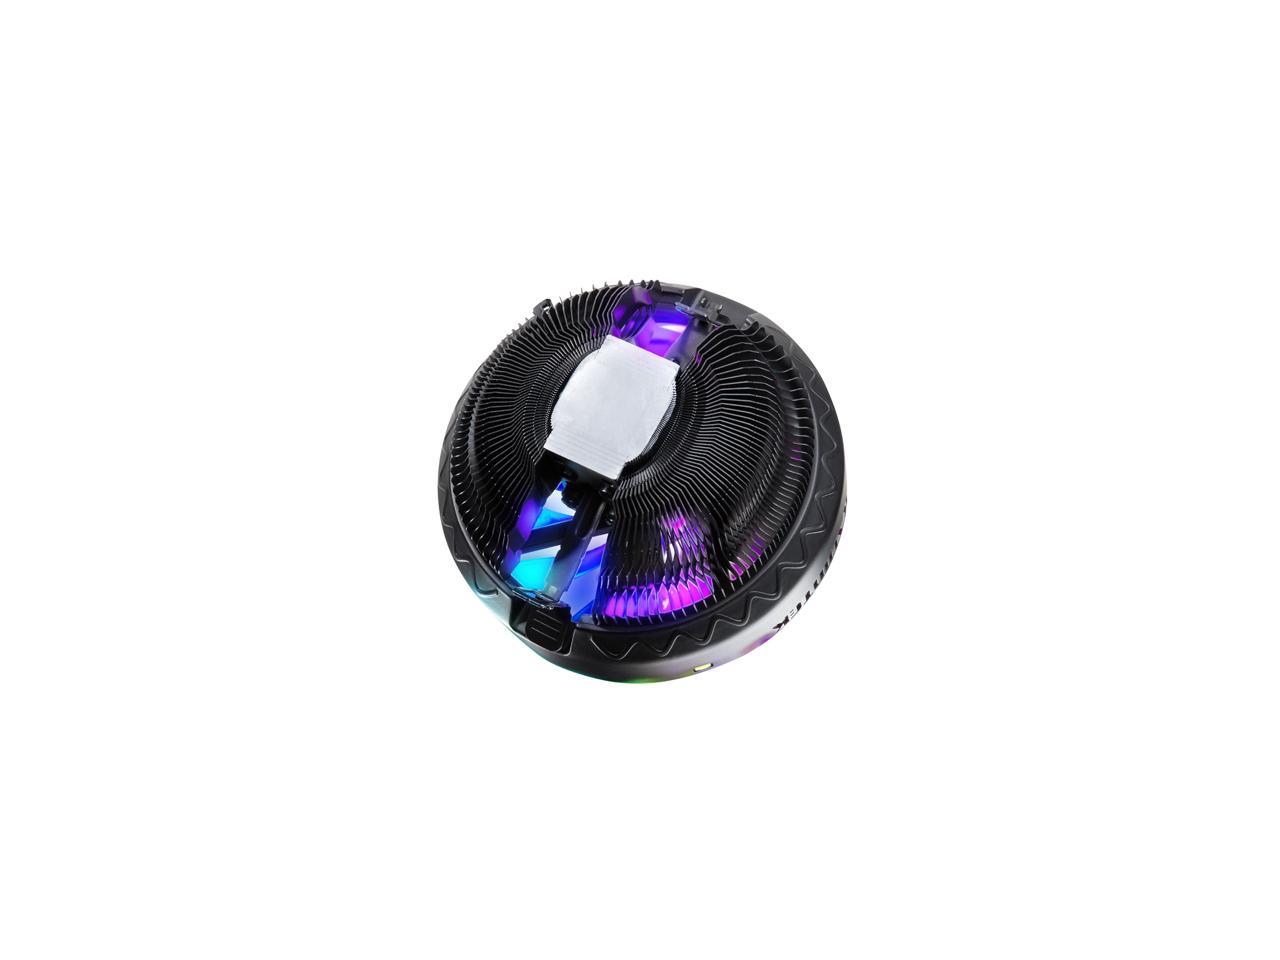 JUNO PRO RBW, a CPU cooler is designed and incorporates a series of evolutionary changes to improve performance, delivers greatly performance , Rainbow LED’s, a 120mm performing fan, easy installation